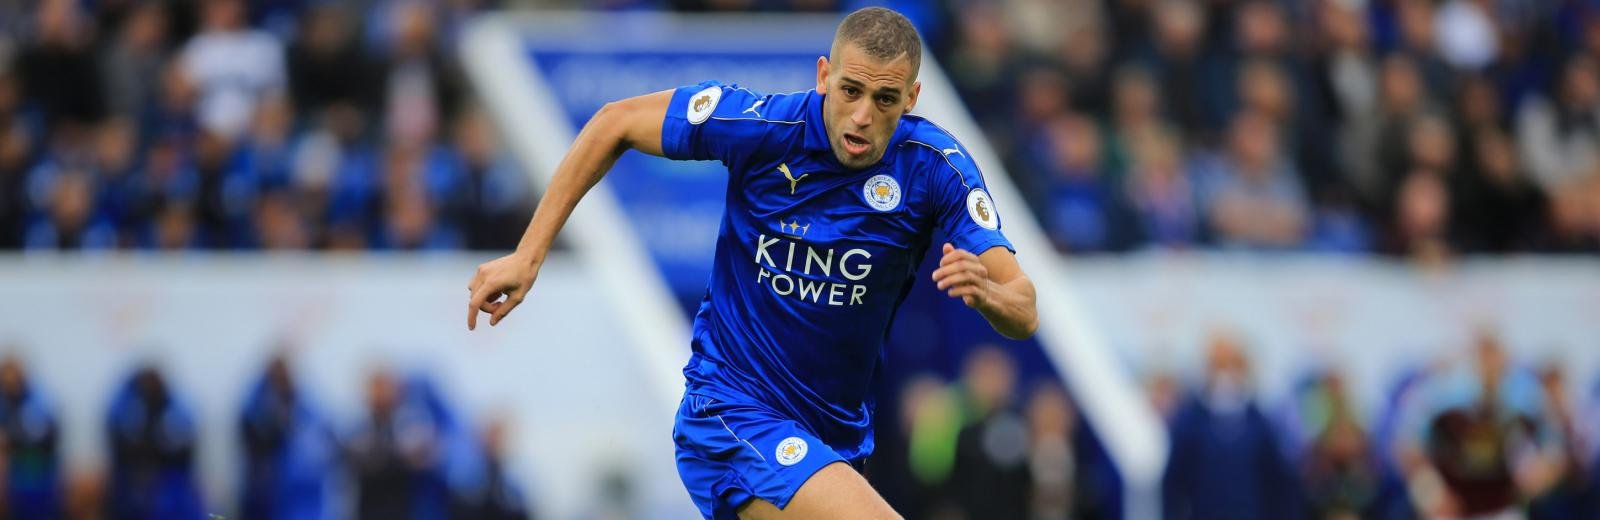 Profile: Leicester City’s club-record signing, Islam Slimani